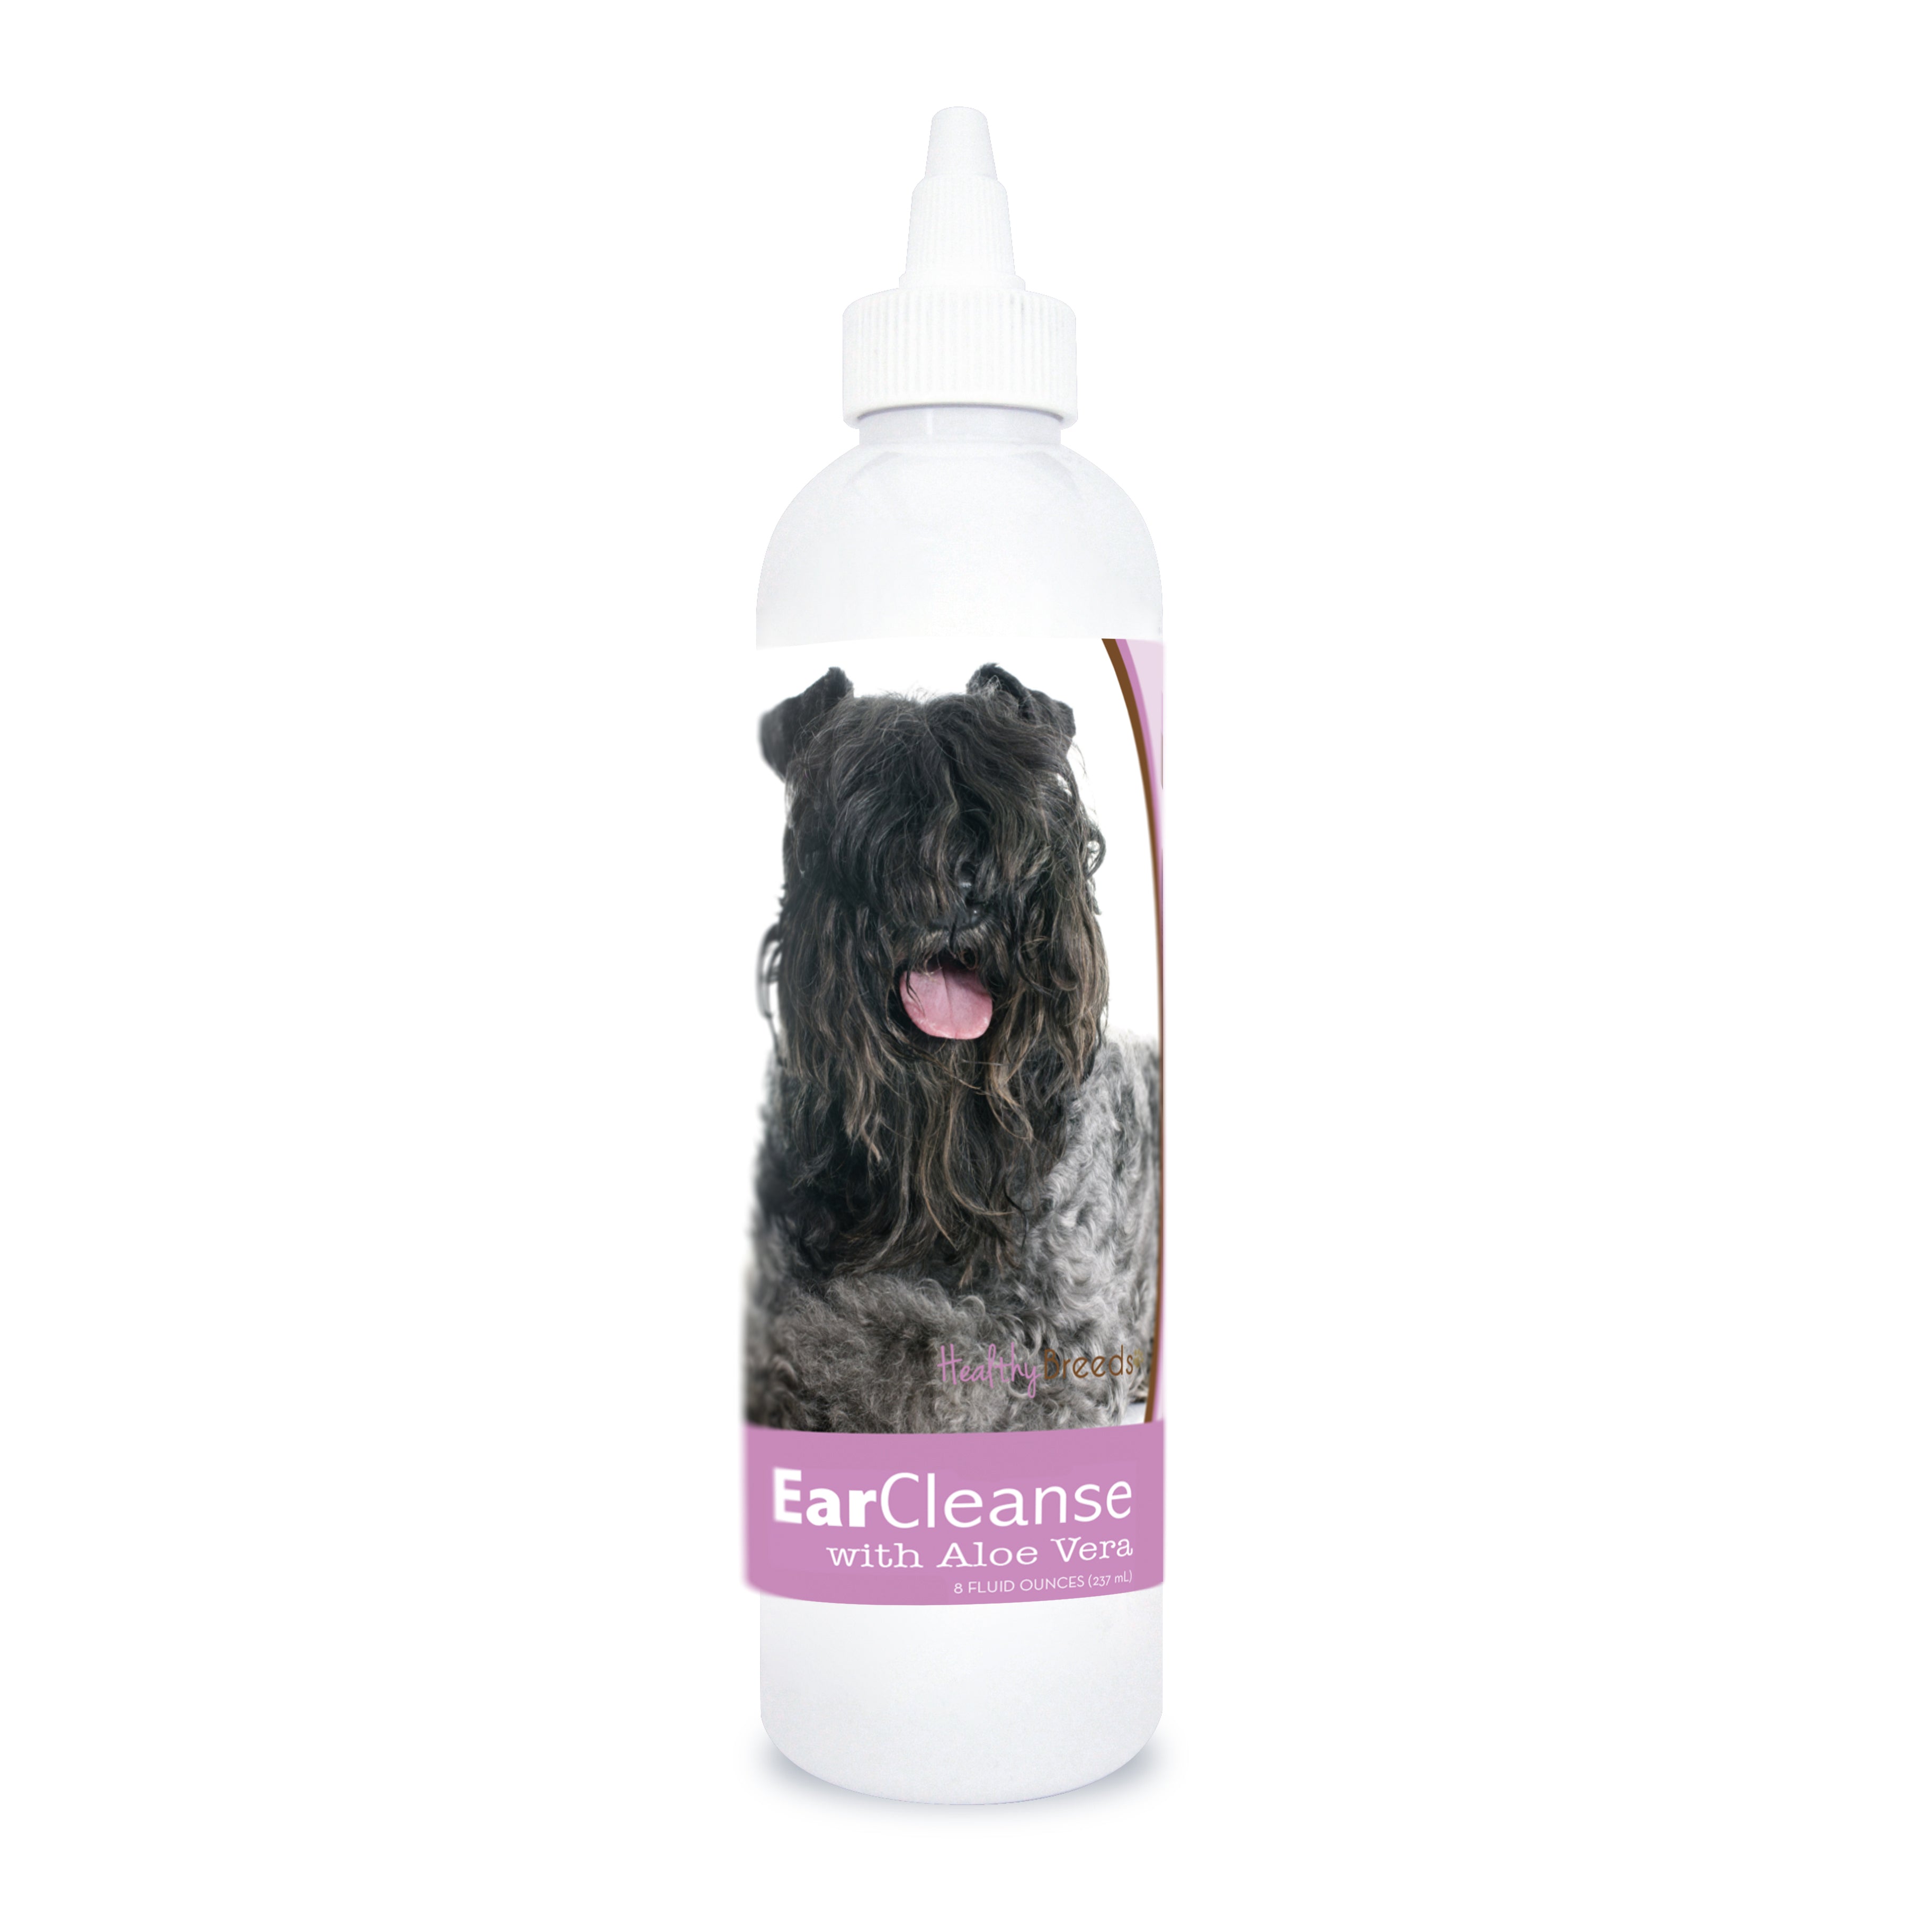 Kerry Blue Terrier Ear Cleanse with Aloe Vera Sweet Pea and Vanilla 8 oz